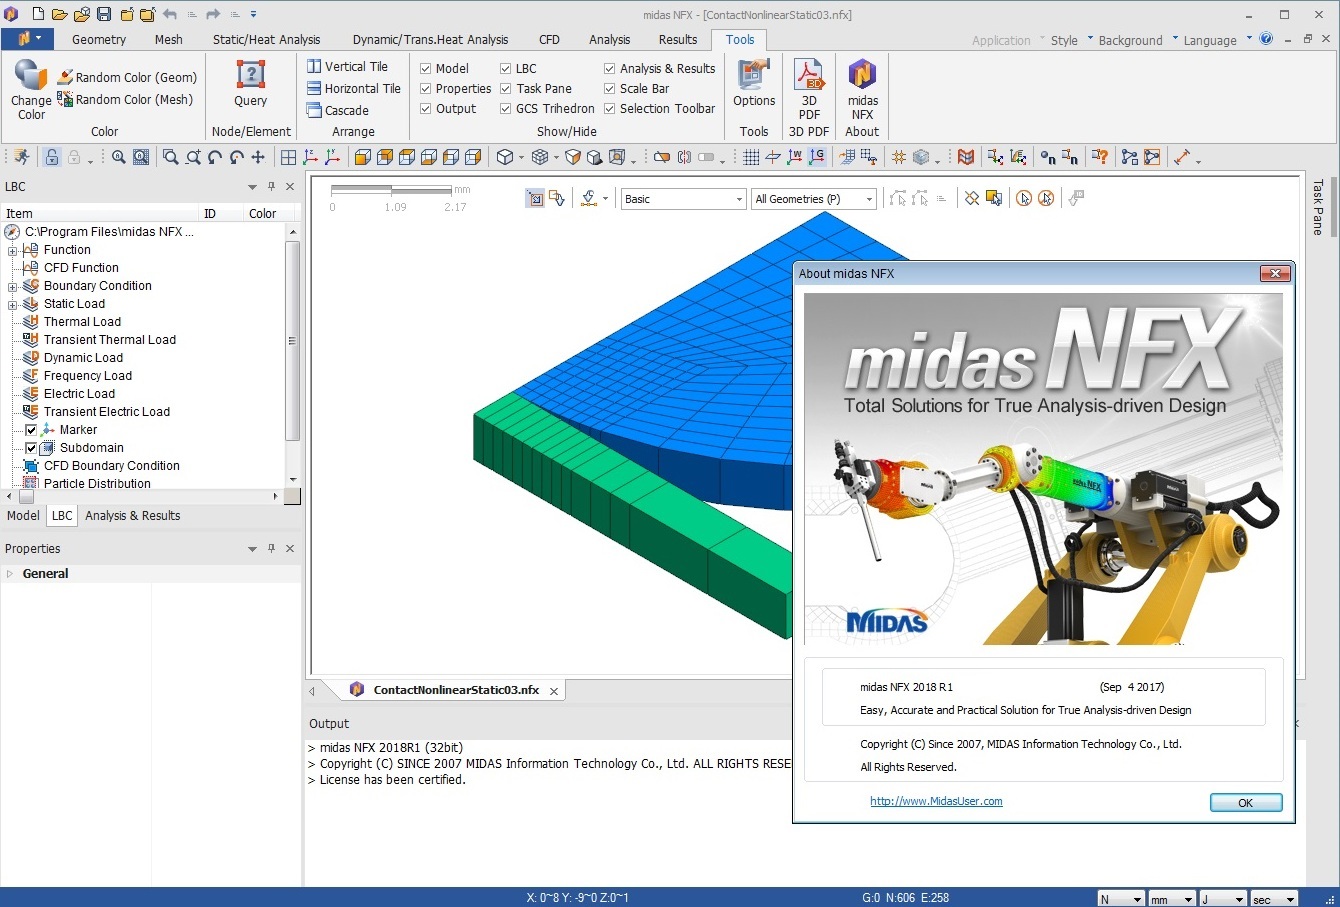 Working with midas NFX 2018 R1 full license